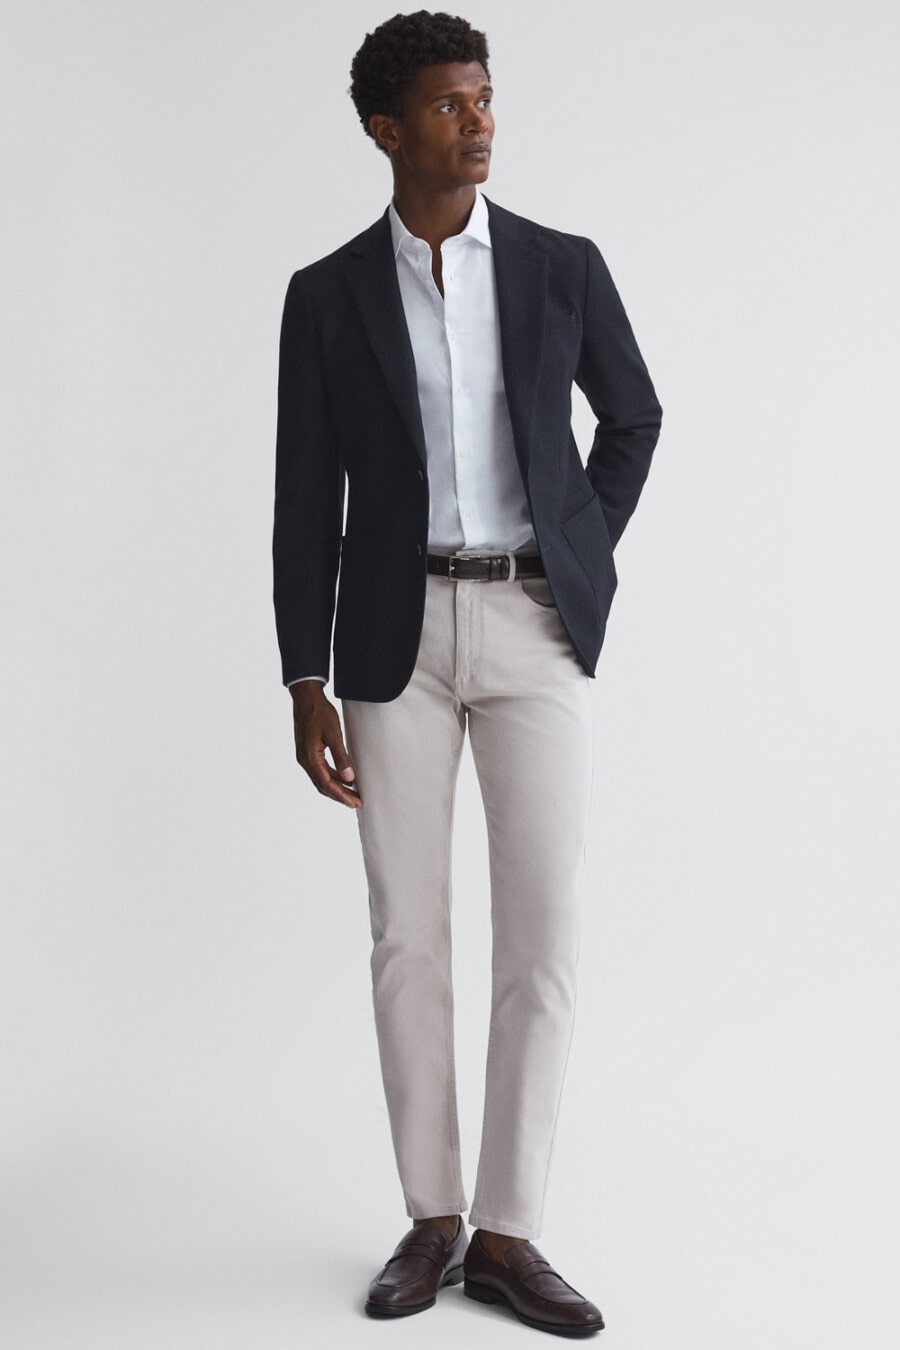 Navy single-breasted blazer, light grey jeans, white shirt, brown leather belt and brown leather sockless penny loafers outfit